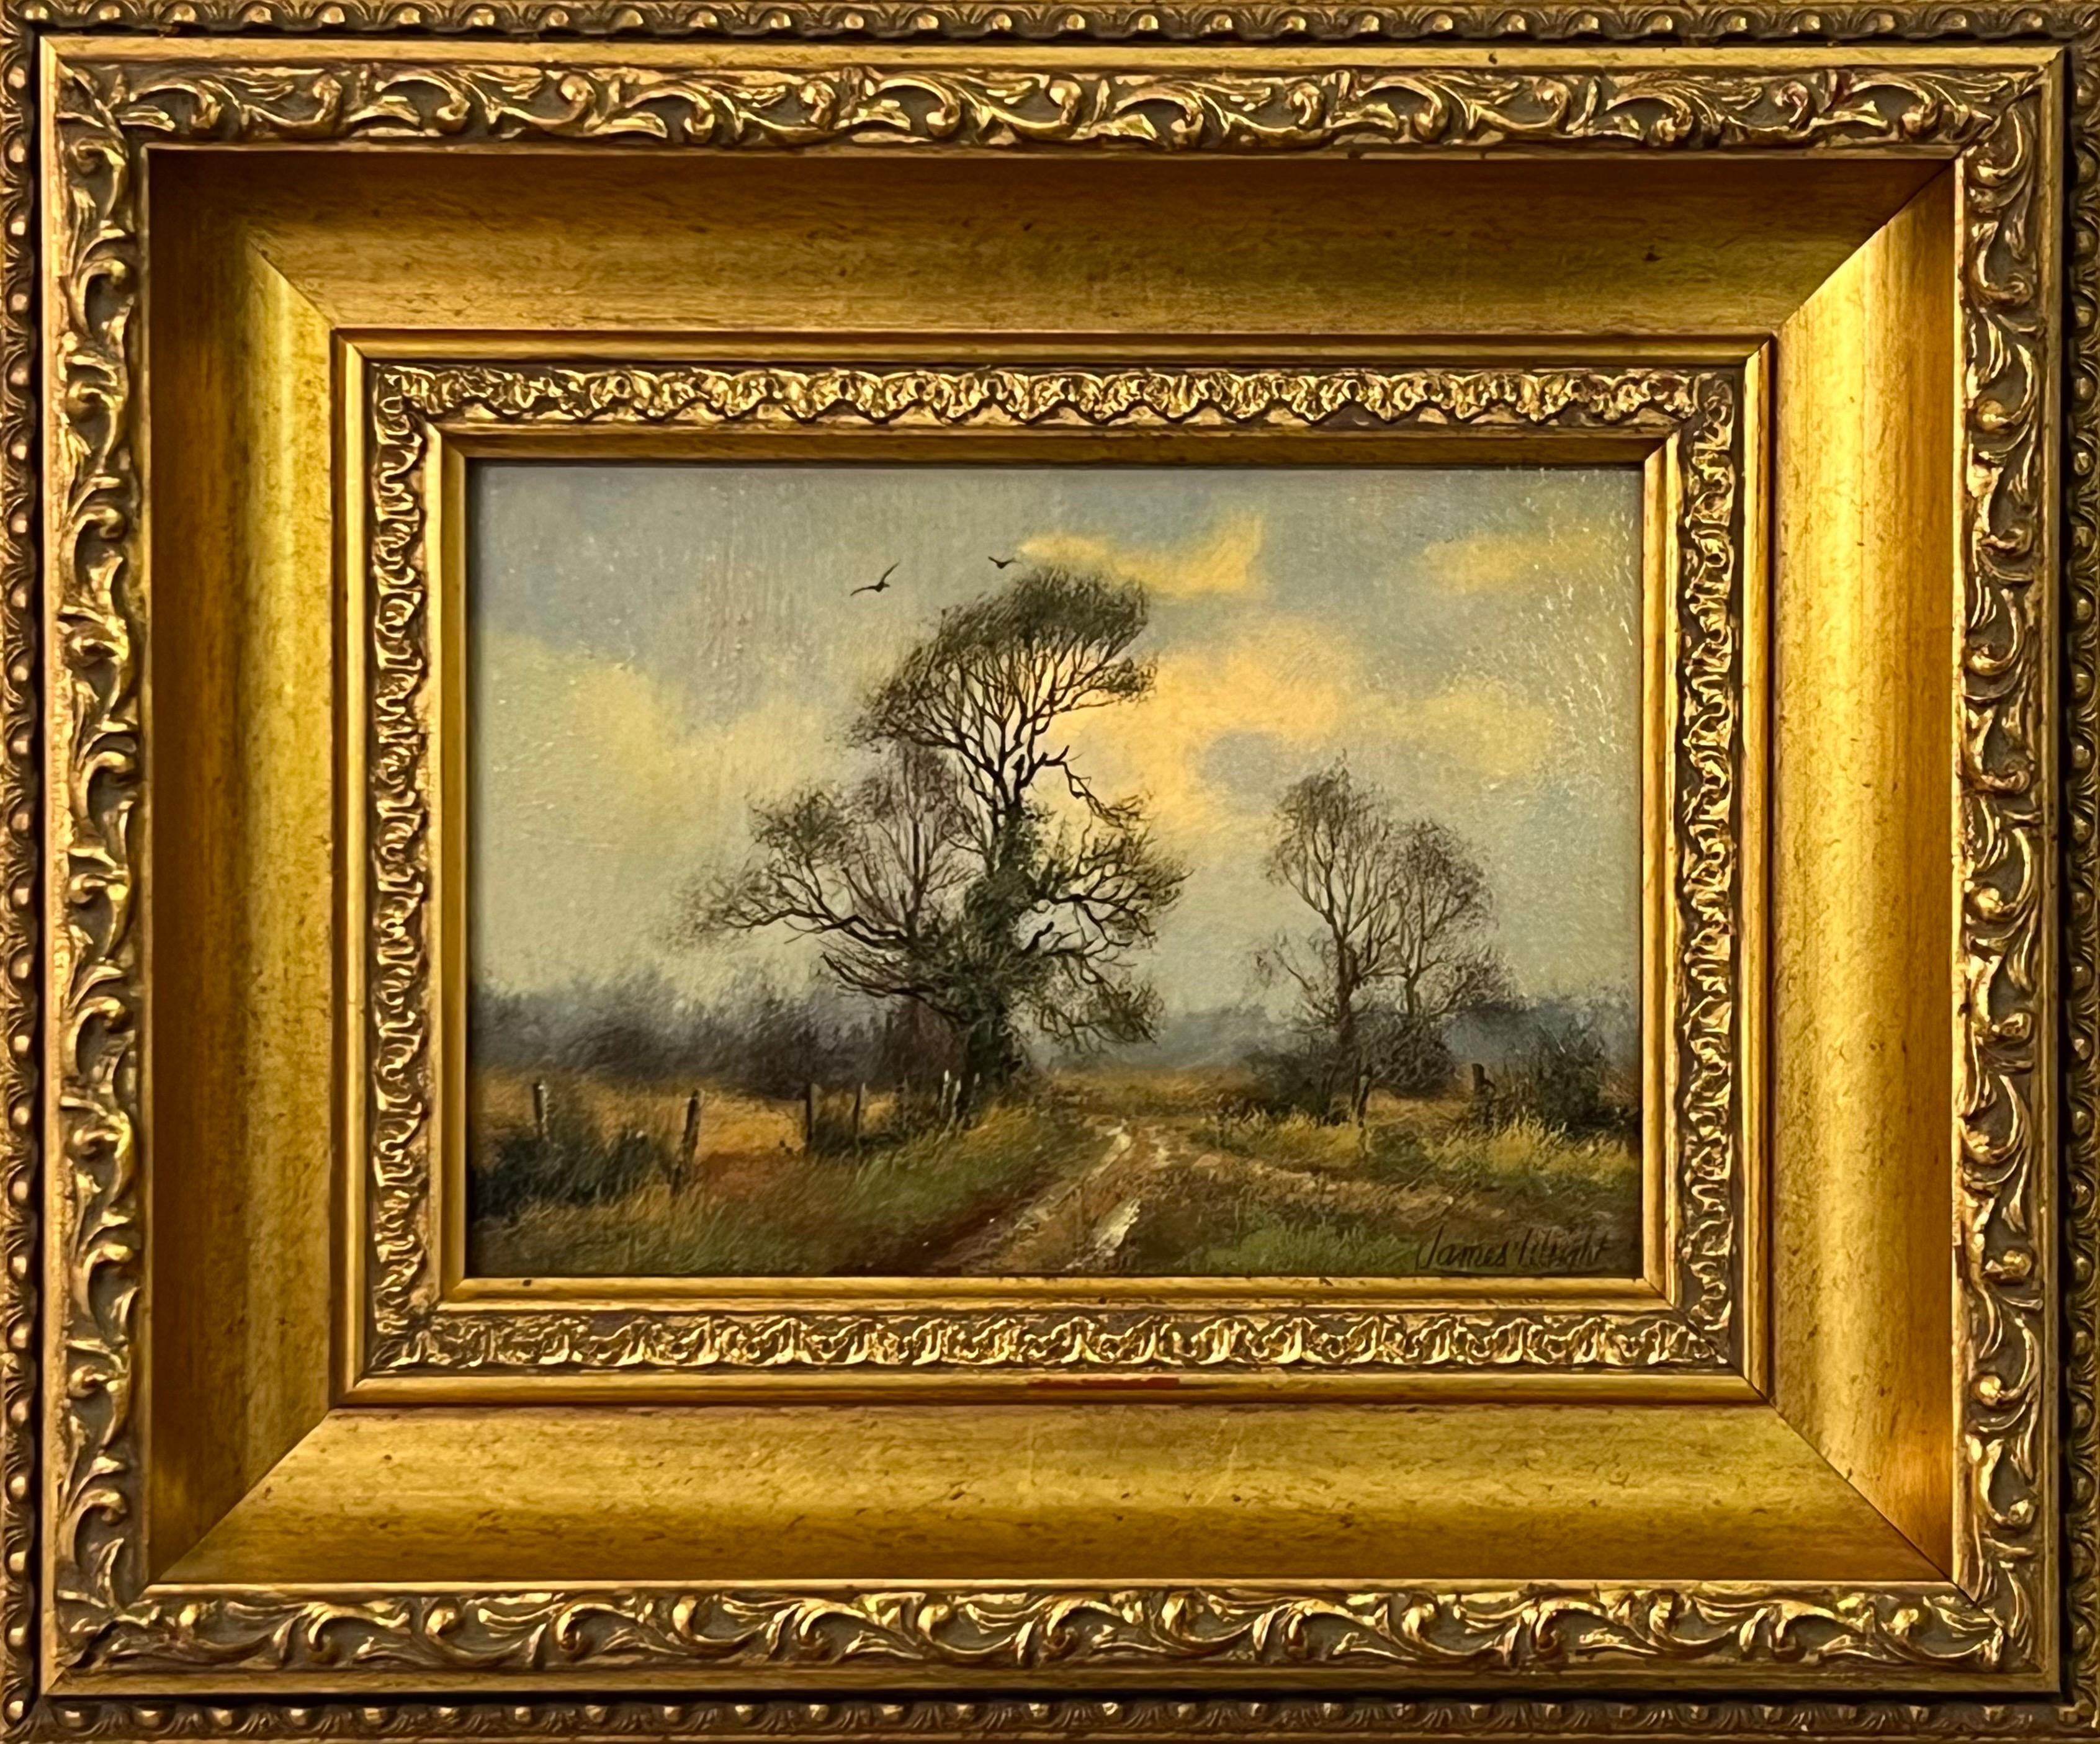 James Wright Landscape Painting - Country Lane with Trees & Birds in English Countryside by 20th Century Artist